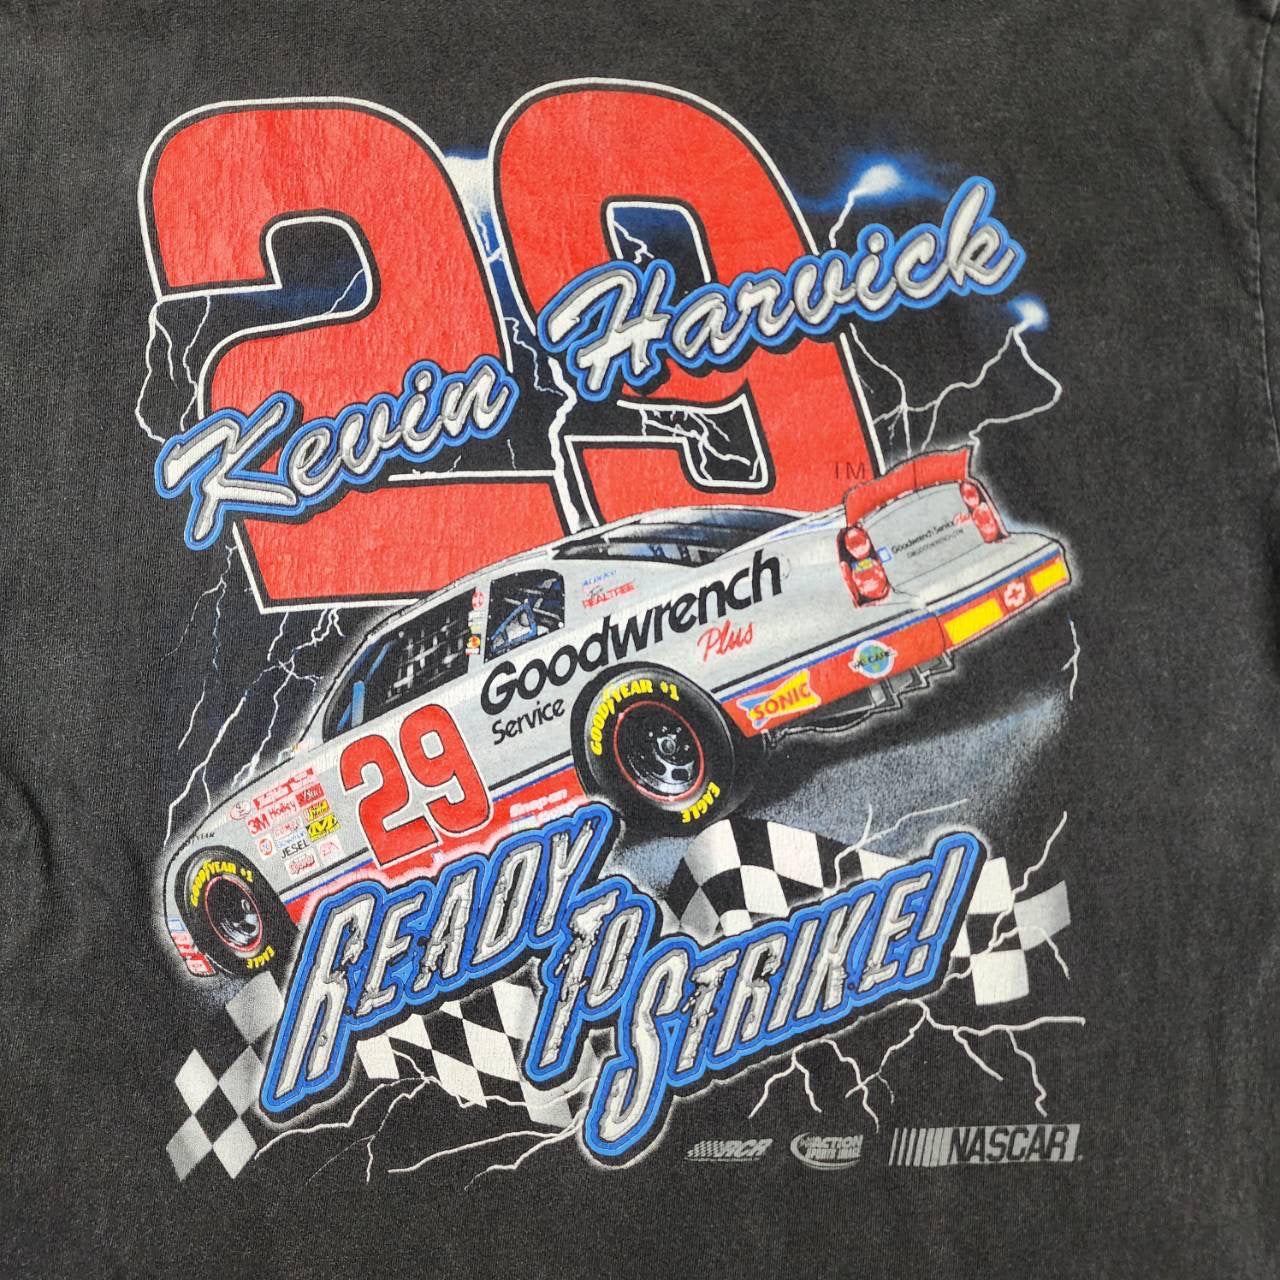 Nascar Racing "Goodwrench Plus" Team T-shirt